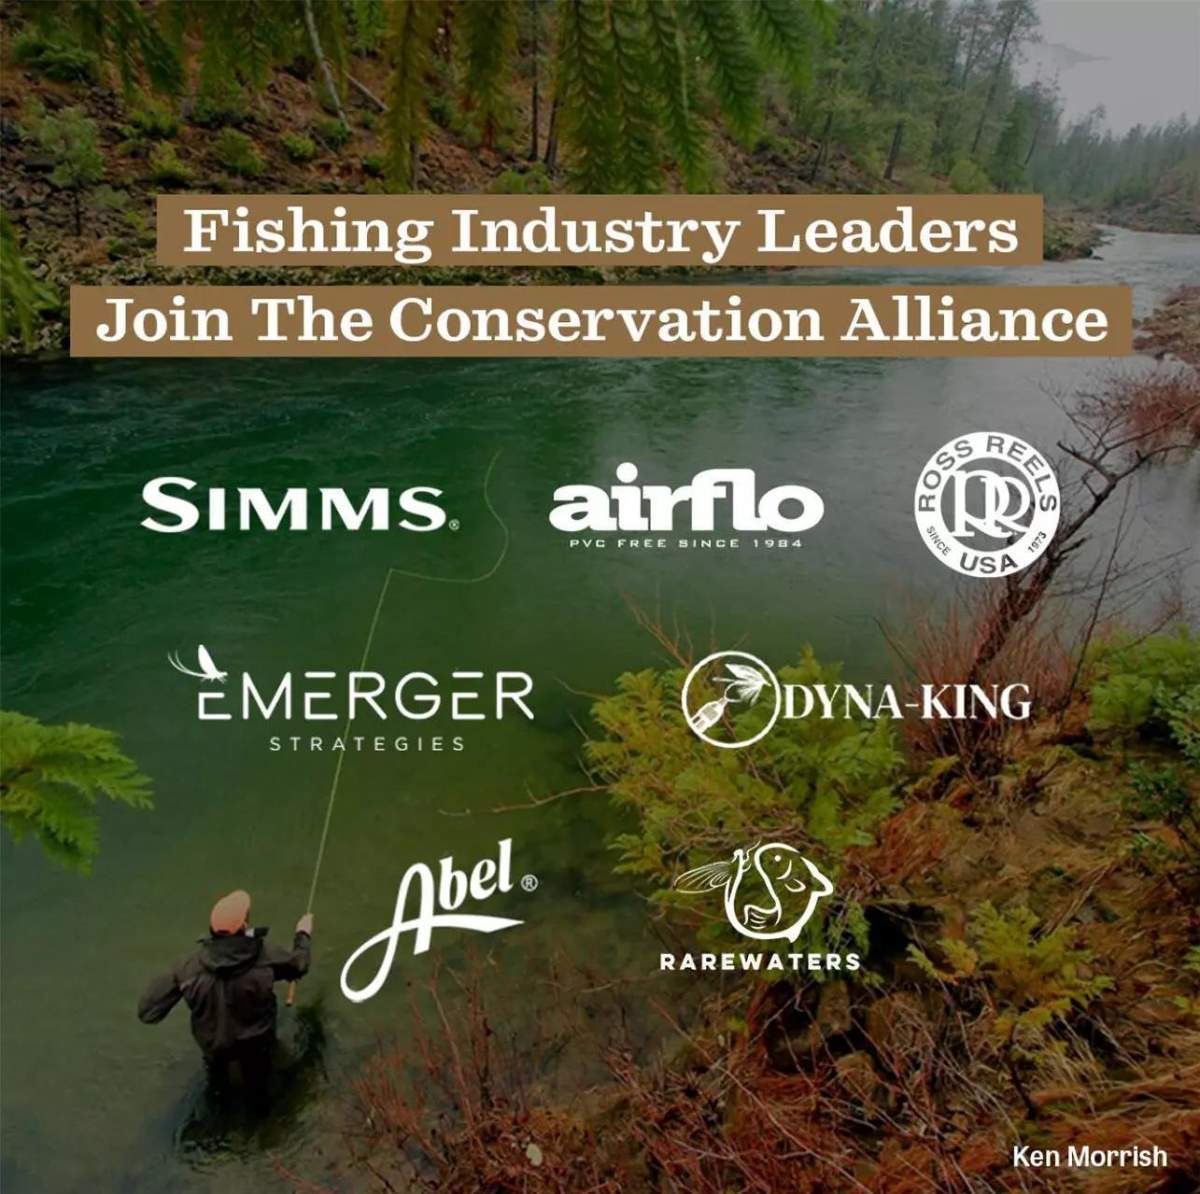 Simms, Mayfly Brands, Join Conservation Alliance